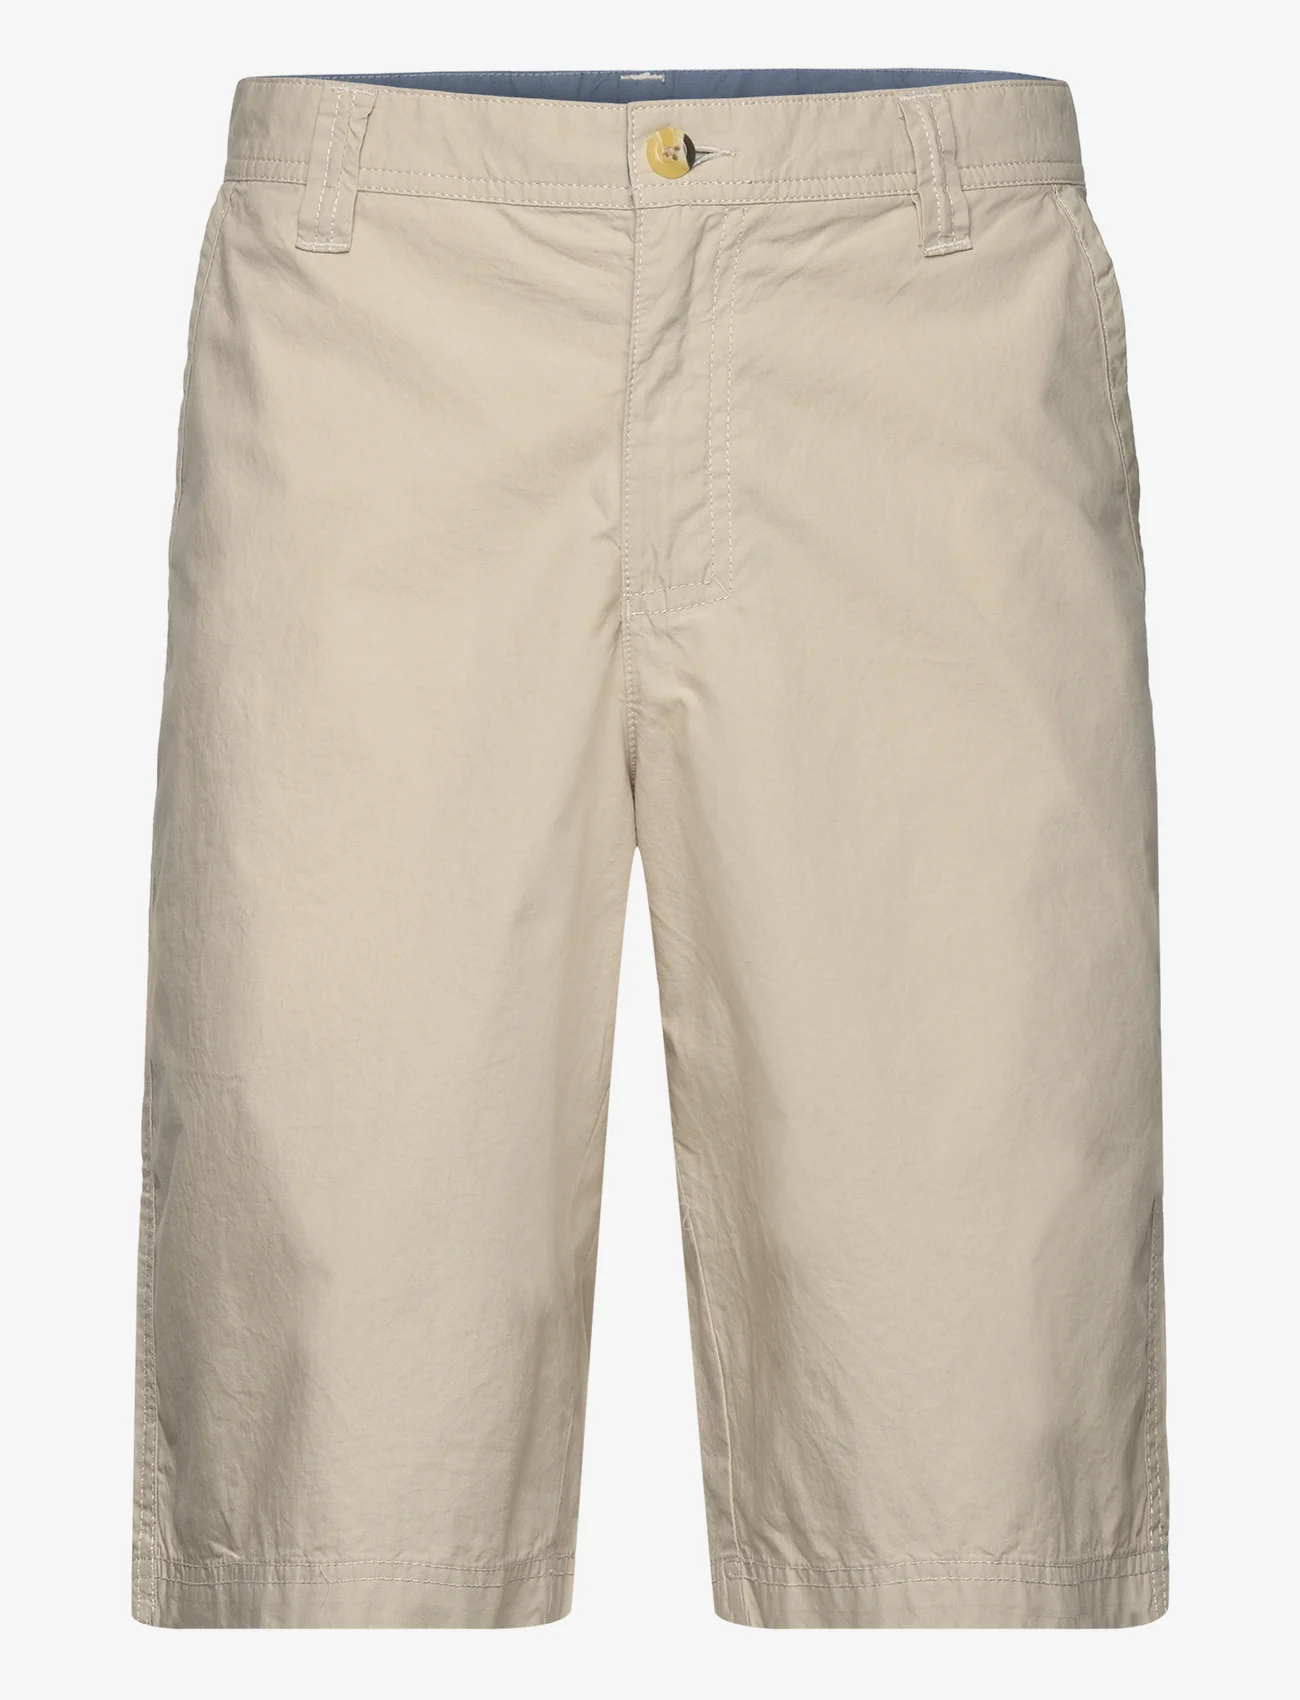 Columbia Sportswear - Washed Out Short - alhaisimmat hinnat - fossil - 0